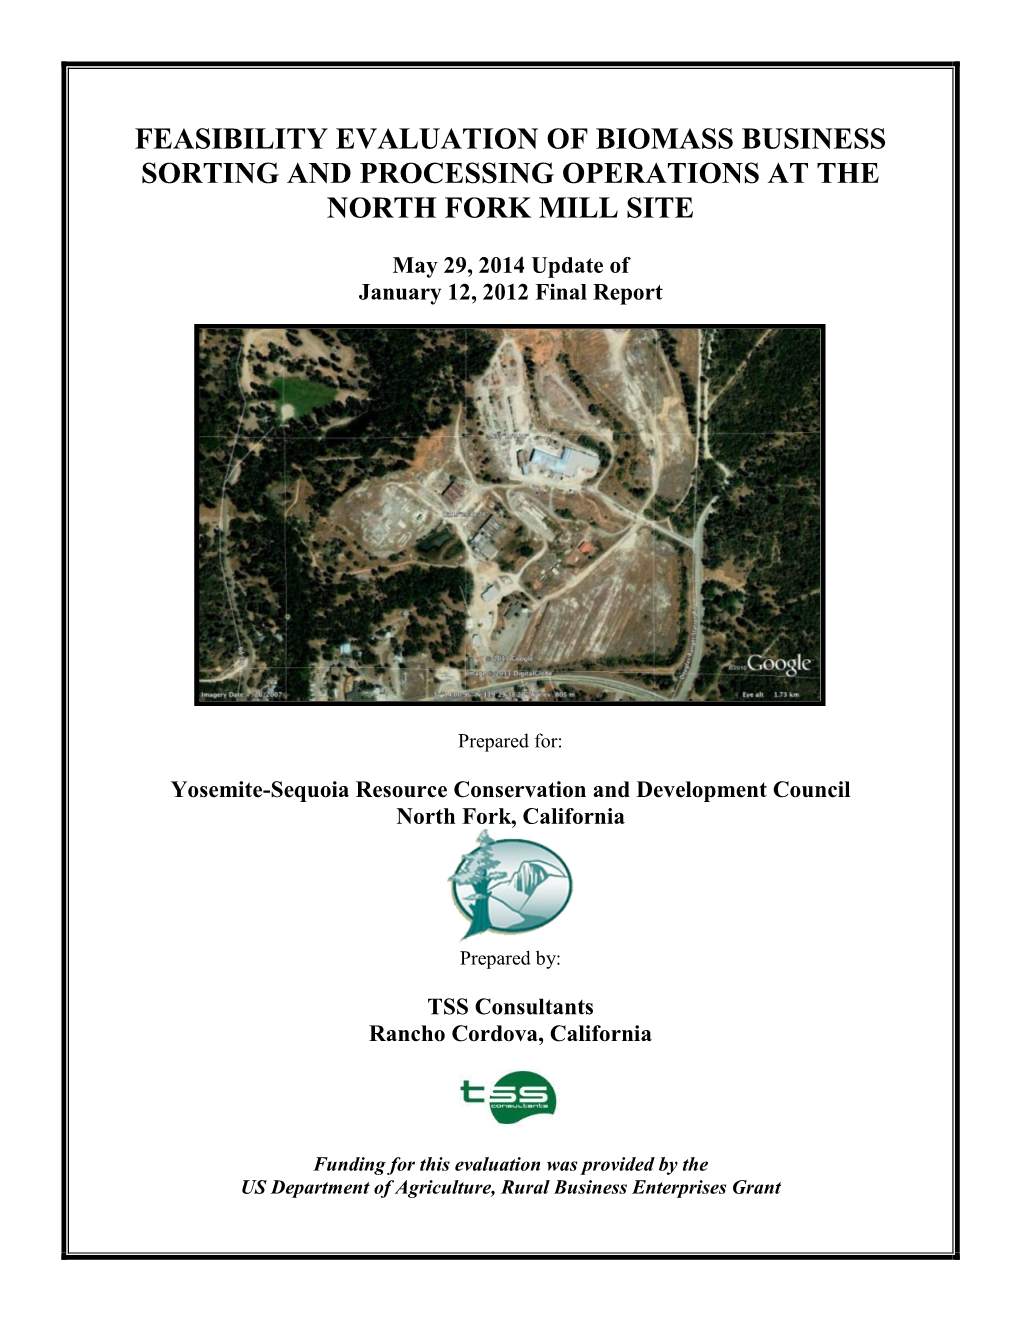 Feasibility Evaluation of Biomass Business Sorting and Processing Operations at the North Fork Mill Site